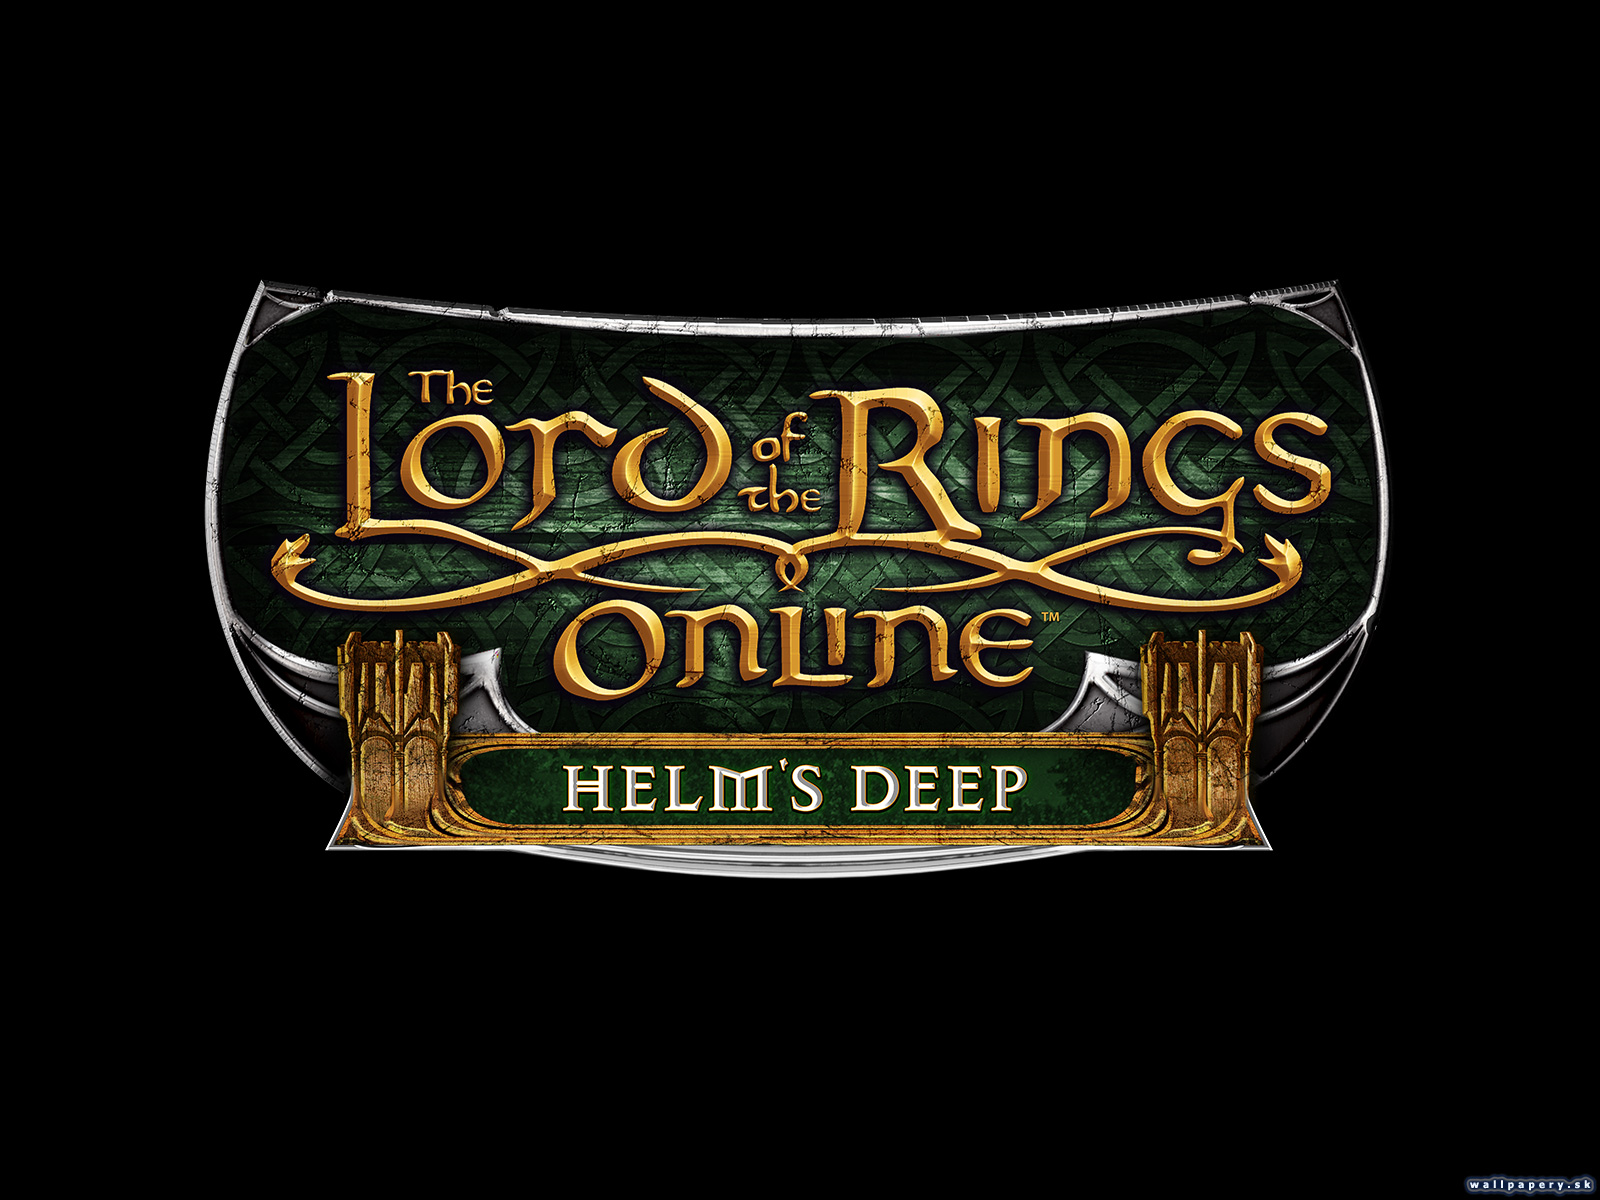 The Lord of the Rings Online: Helm's Deep - wallpaper 2